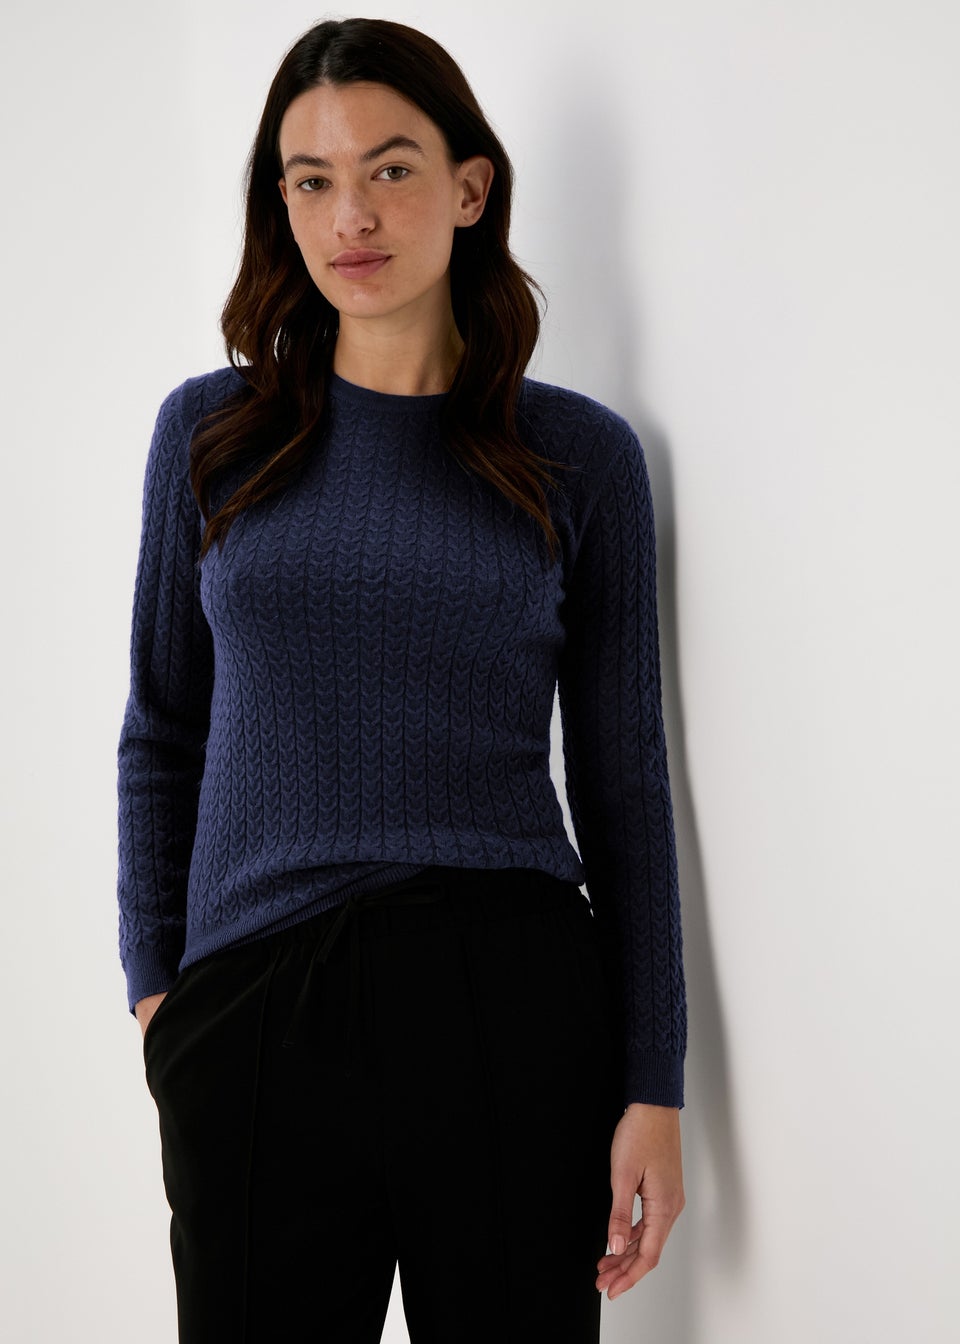 Navy Baby Cable Knit Jumper